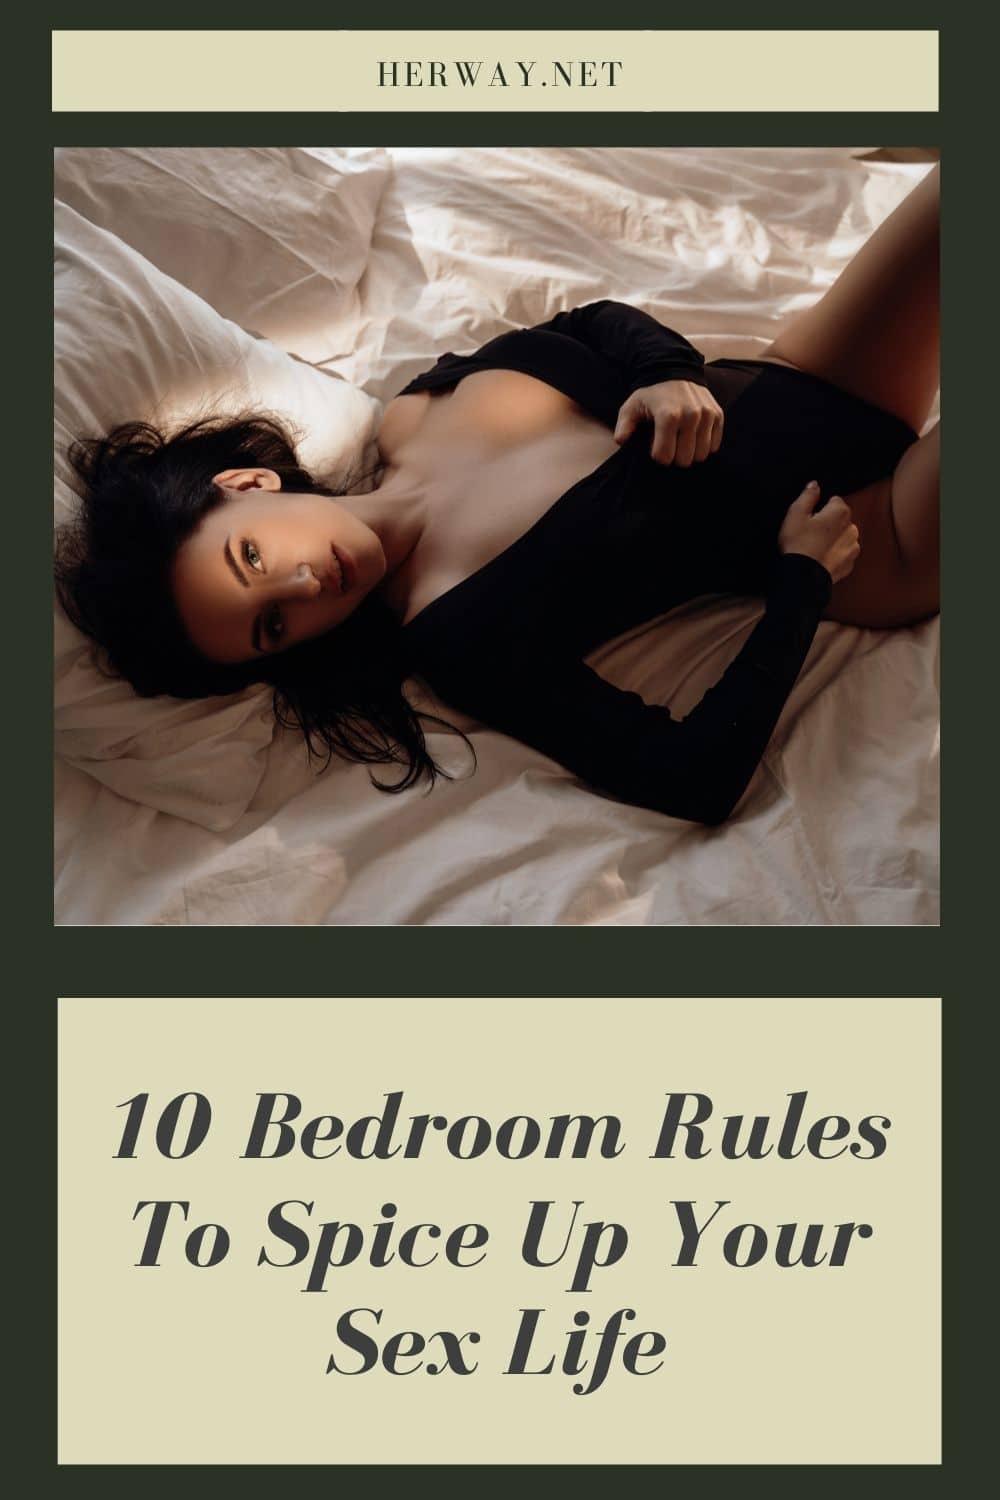 10 Bedroom Rules To Spice Up Your Sex Life